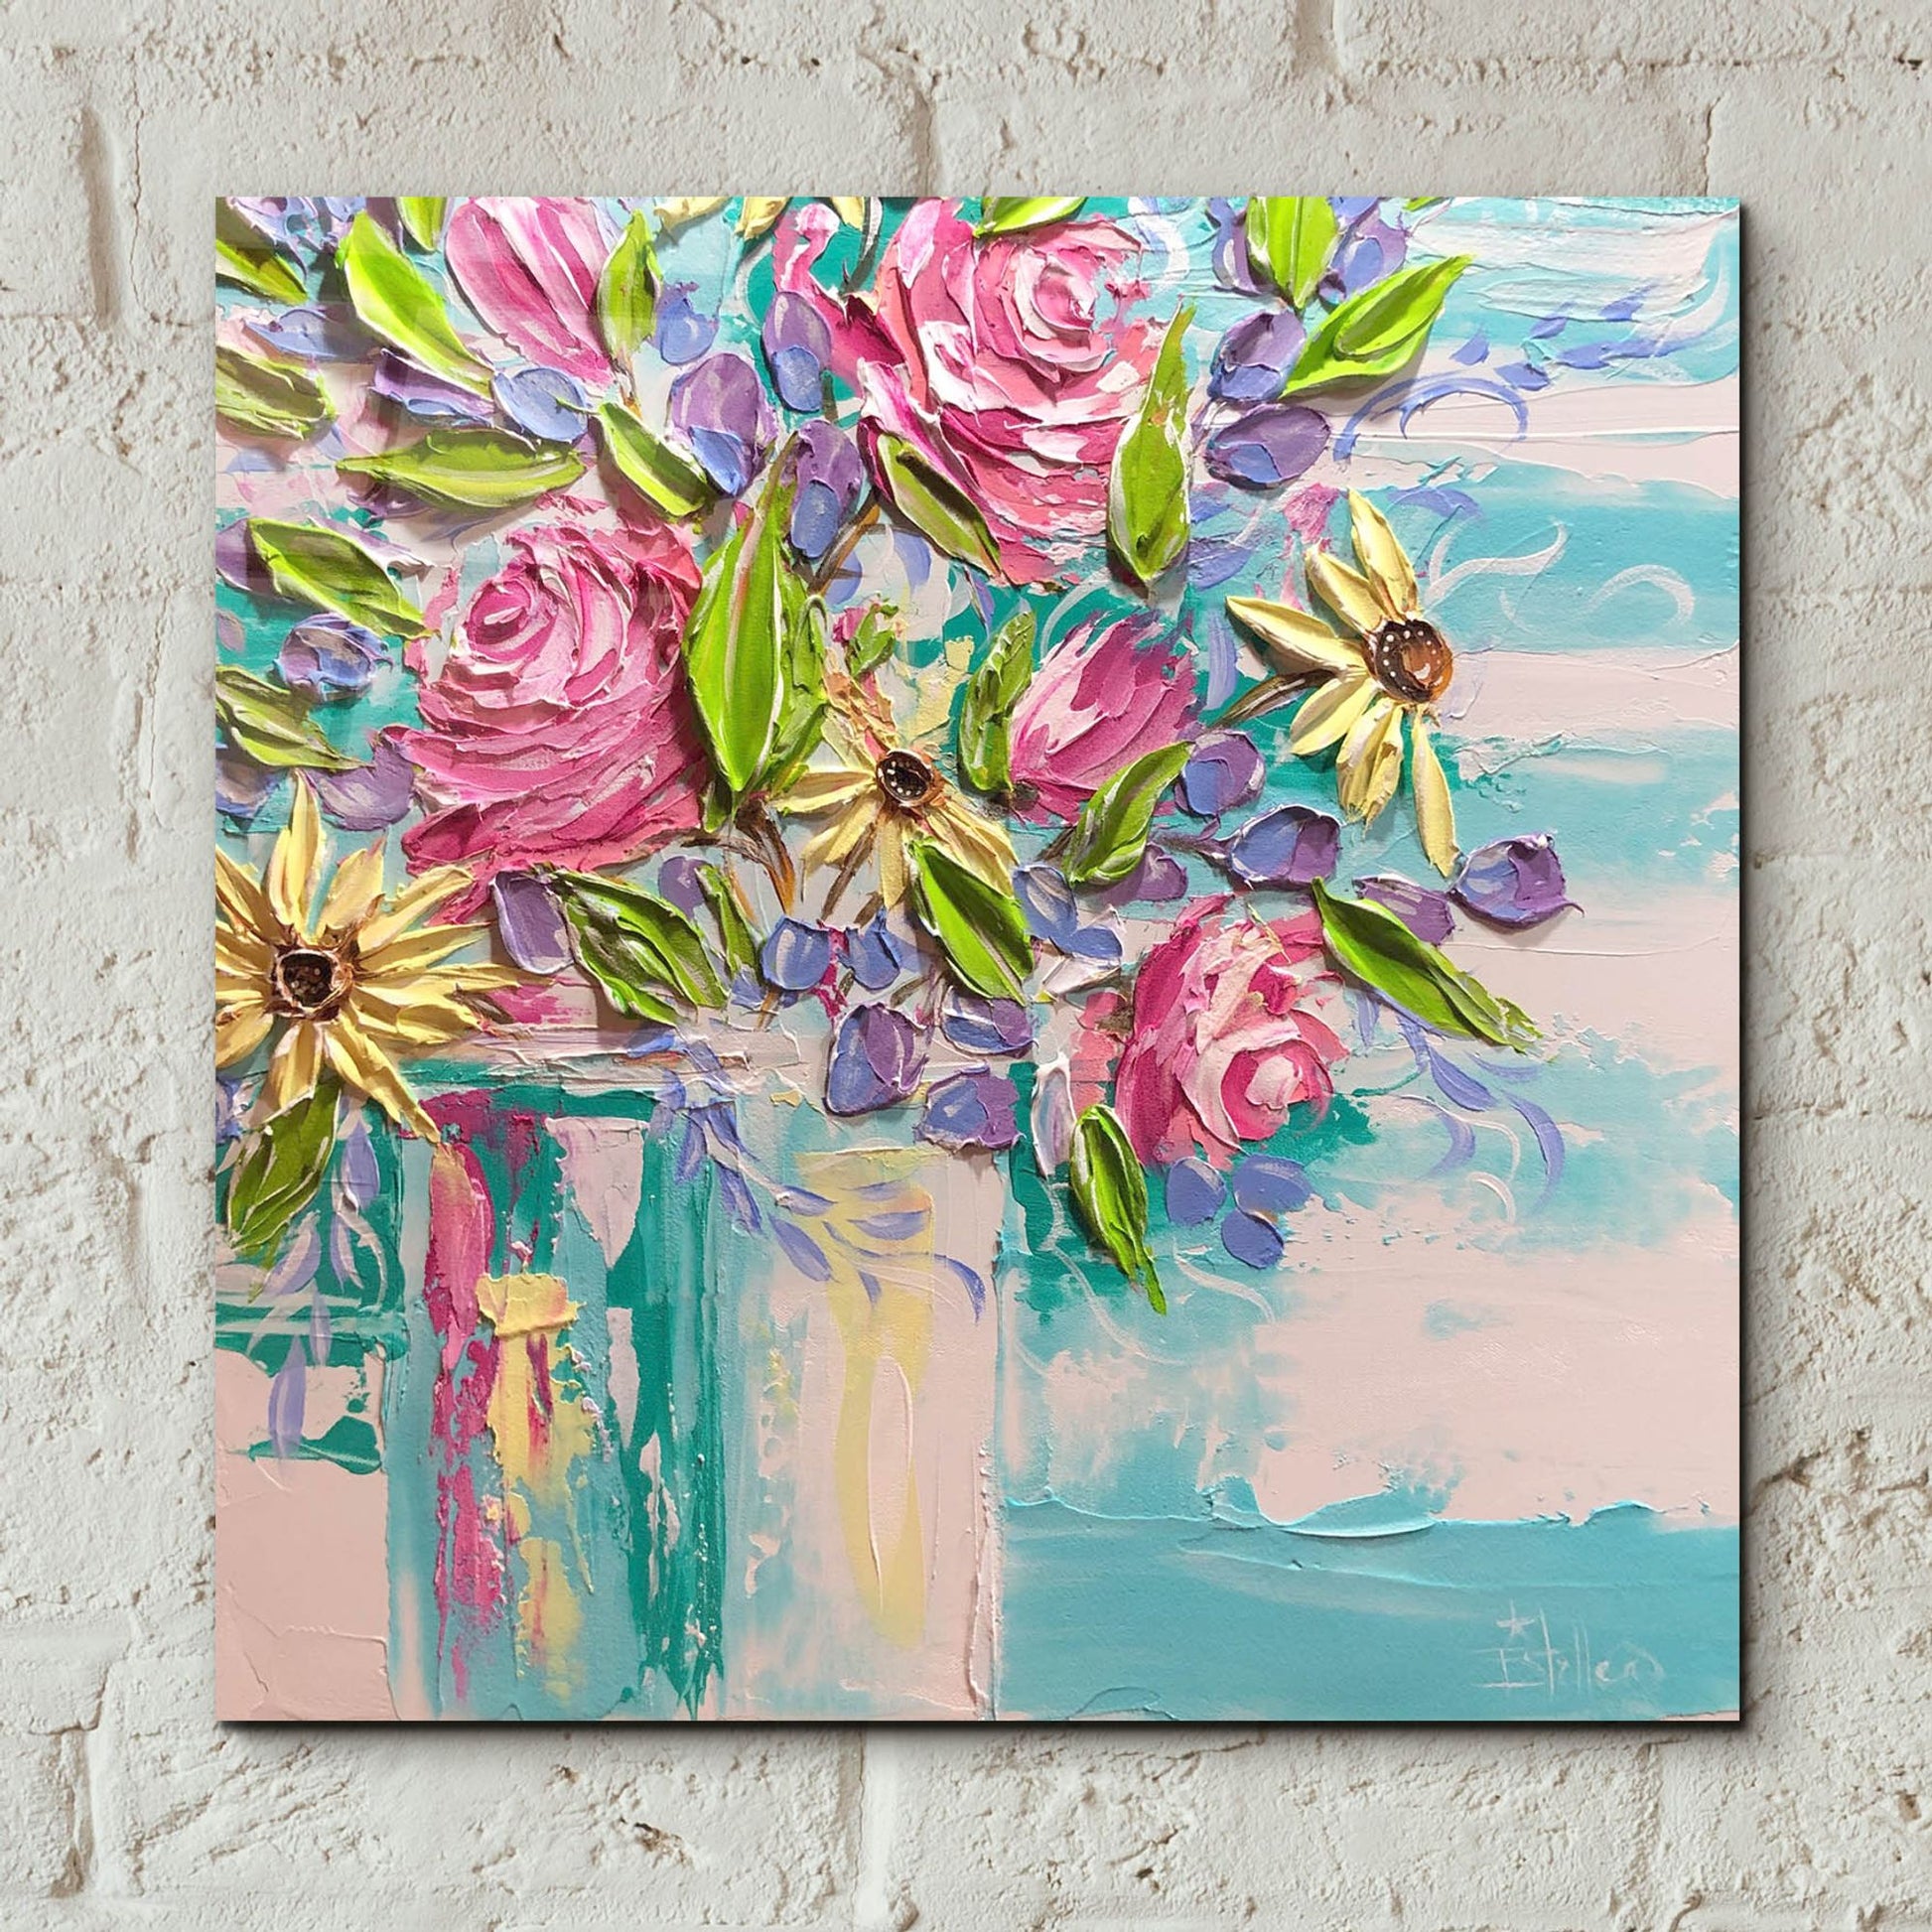 Epic Art 'Floral Bliss' by Estelle Grengs, Acrylic Glass Wall Art,12x12